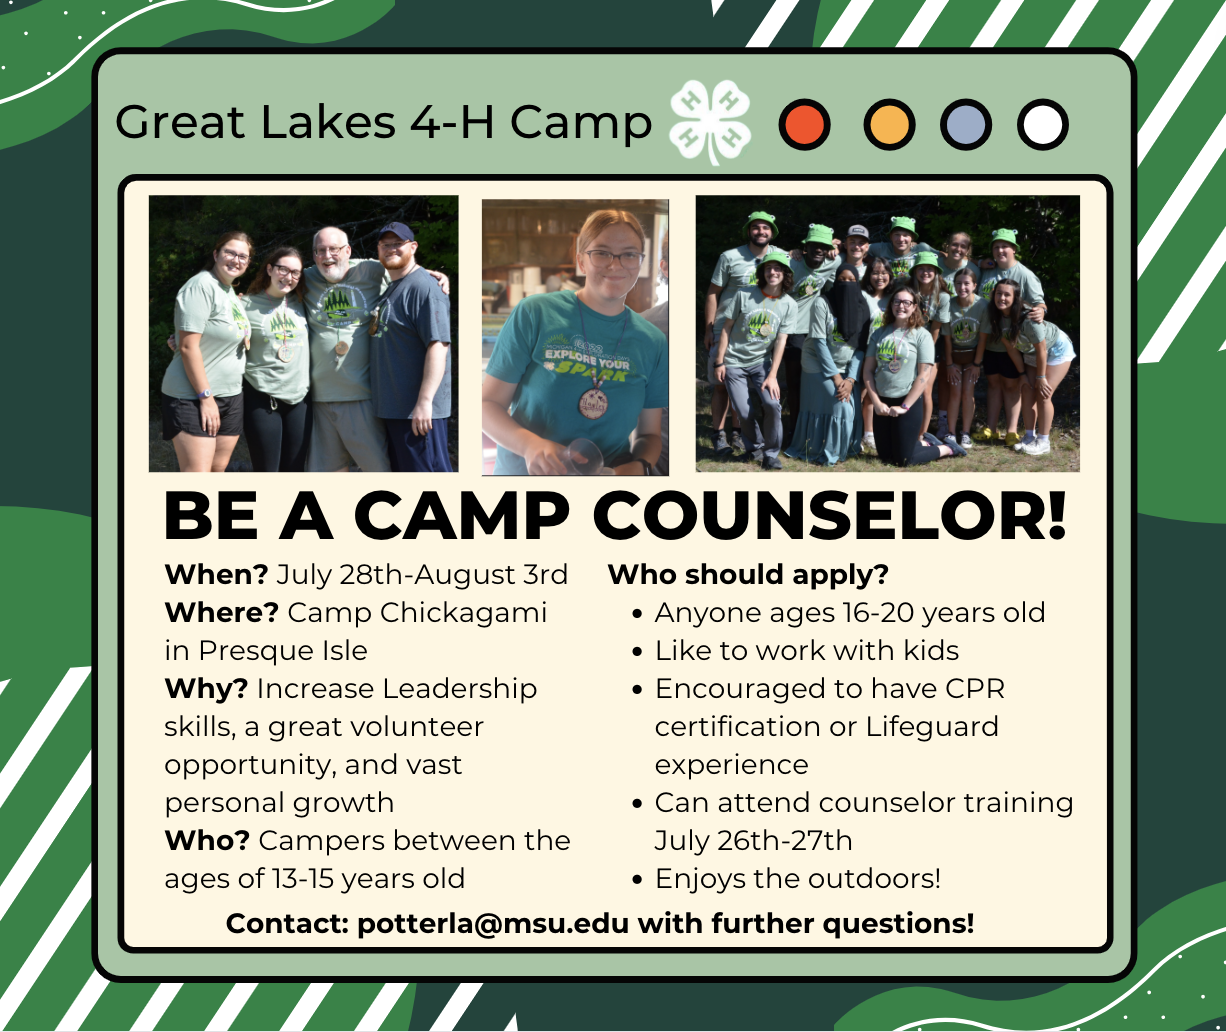 Counselor recruitment flyer.png